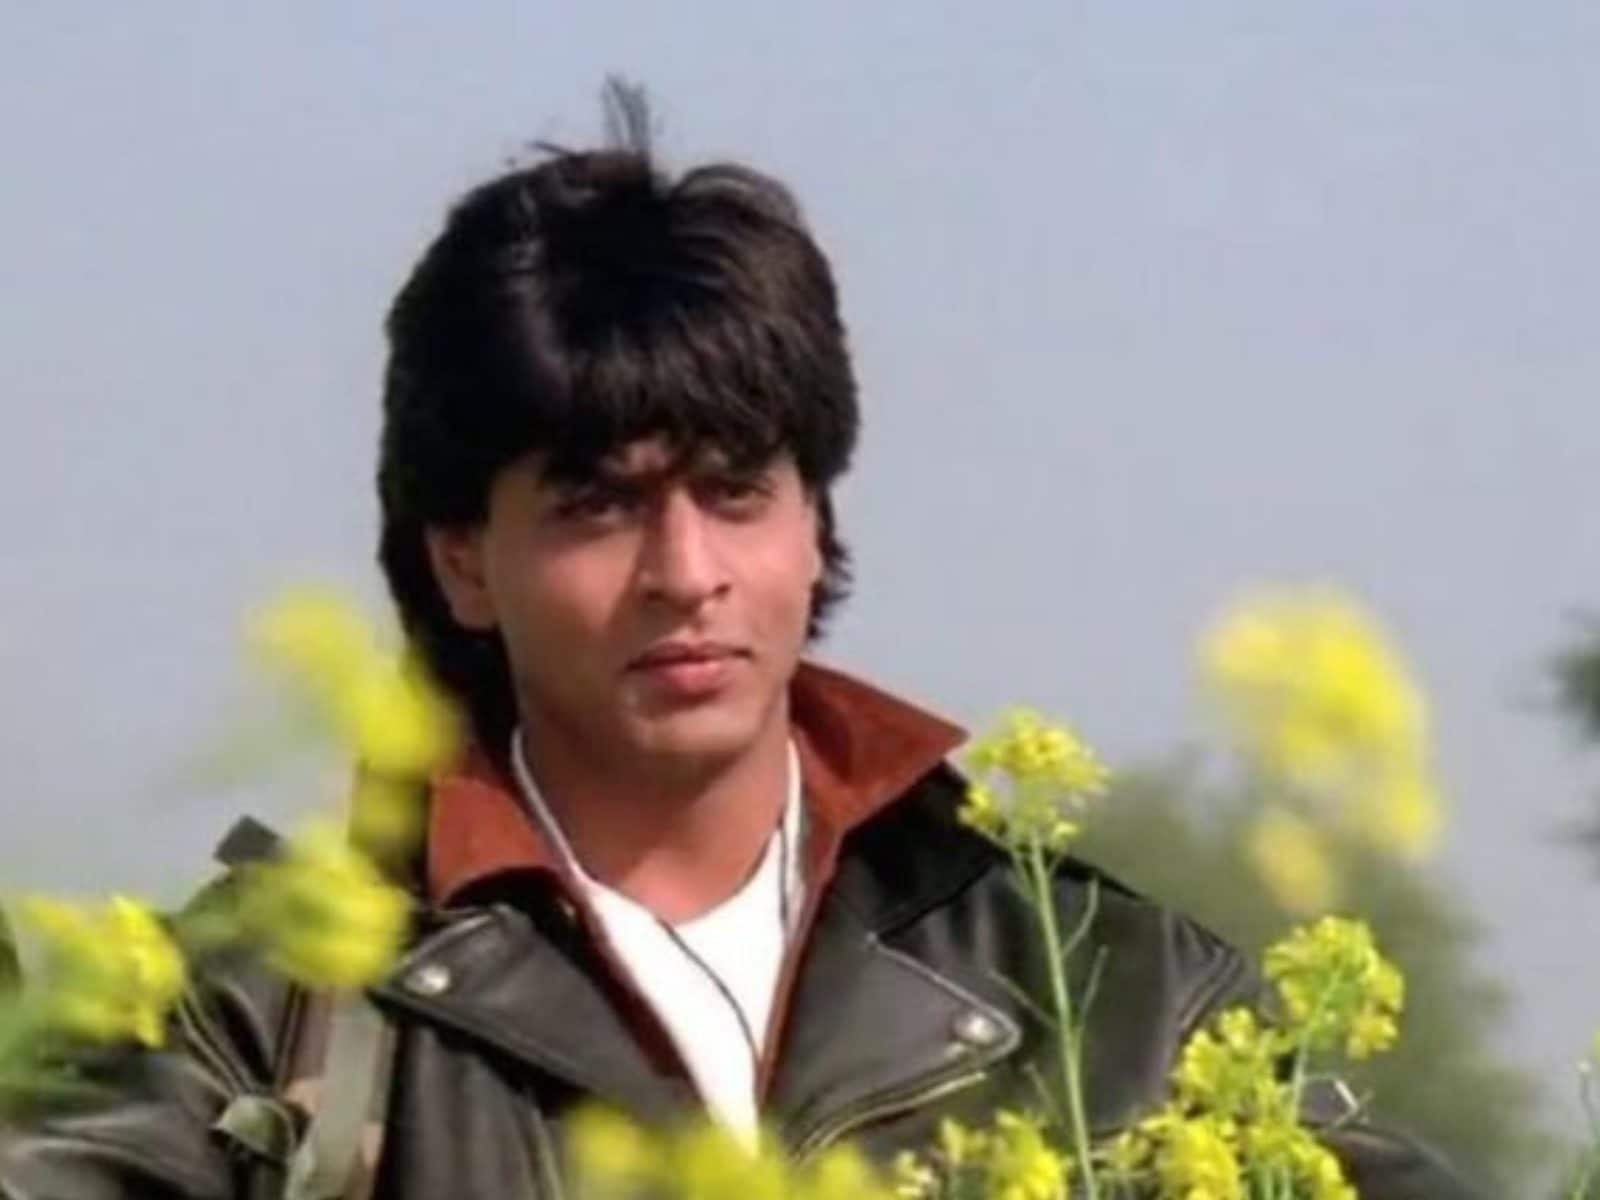 Shah Rukh Khan: How Bollywood's romance king became an action star